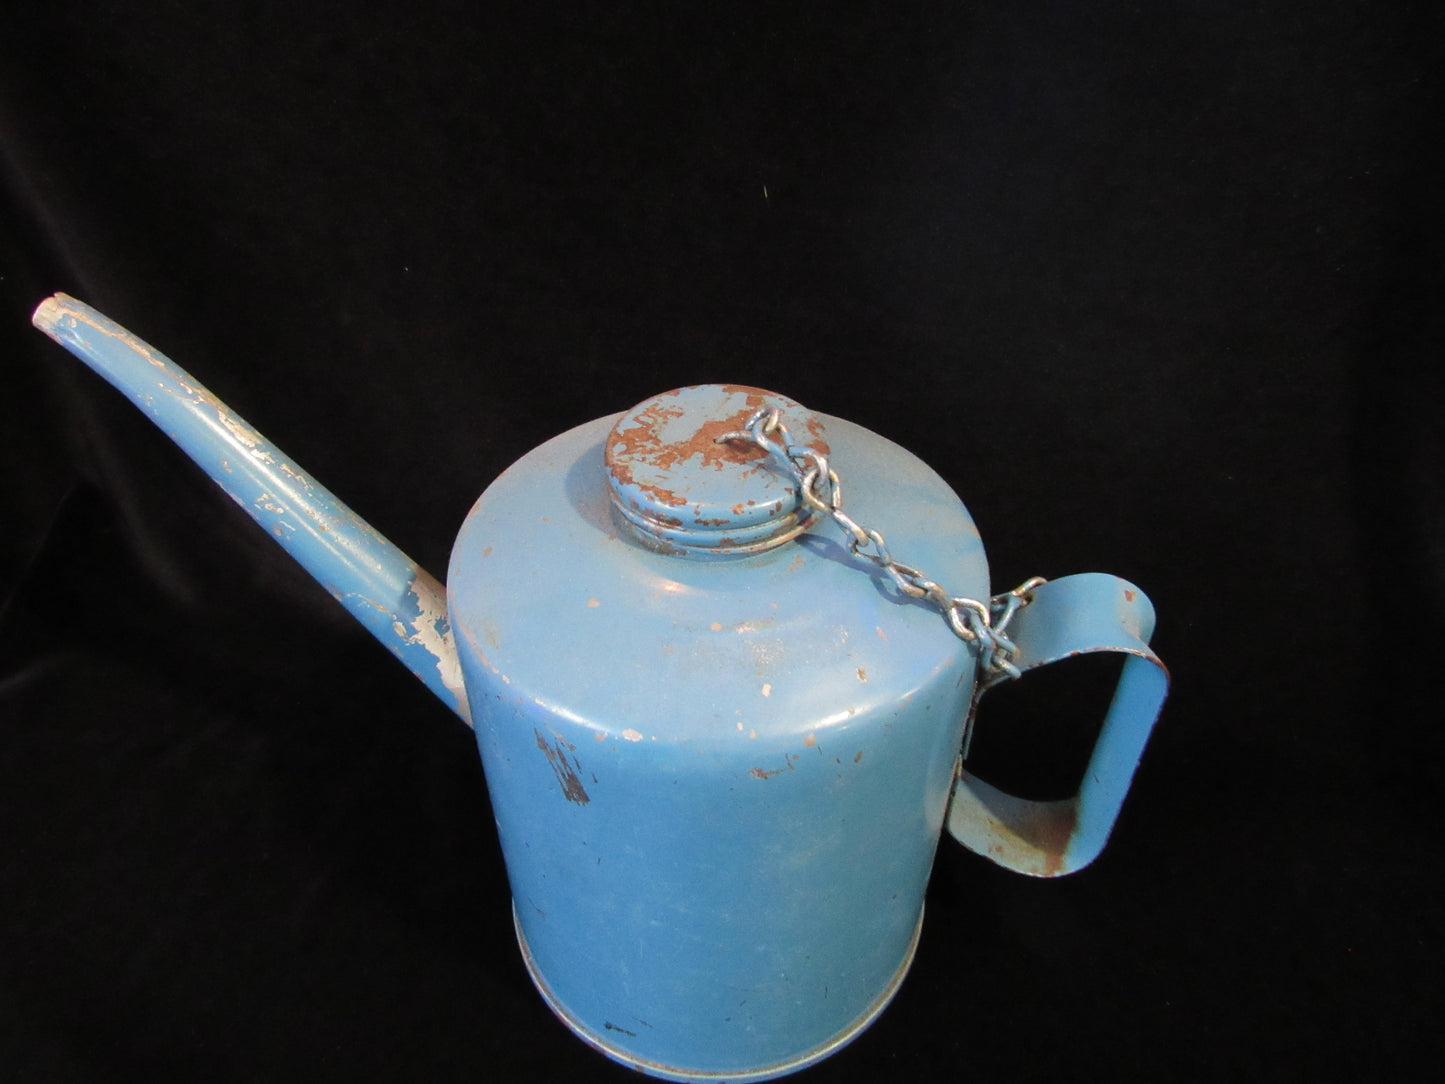 Antique Blue Eagle Railroad Oil Kerosene Can with Chain Lid for Gas or Fuel USA Made